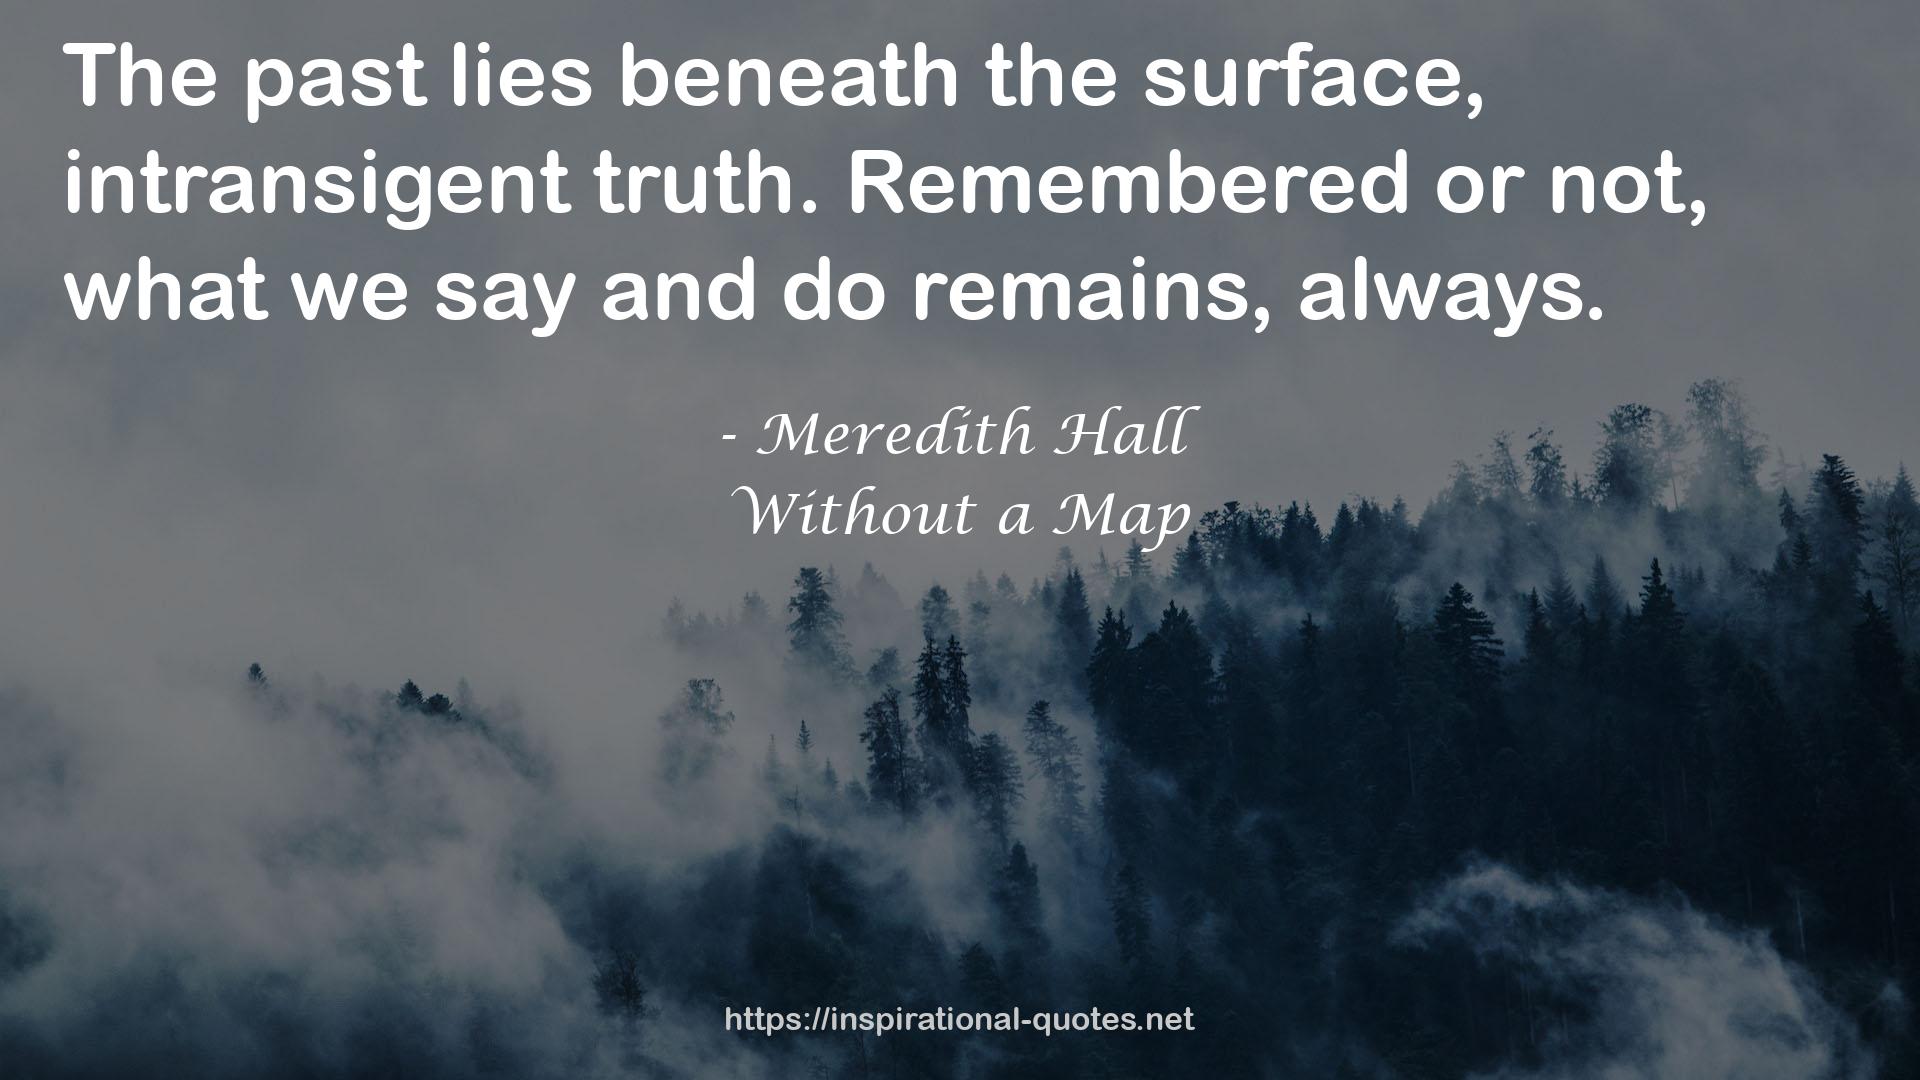 Meredith Hall QUOTES